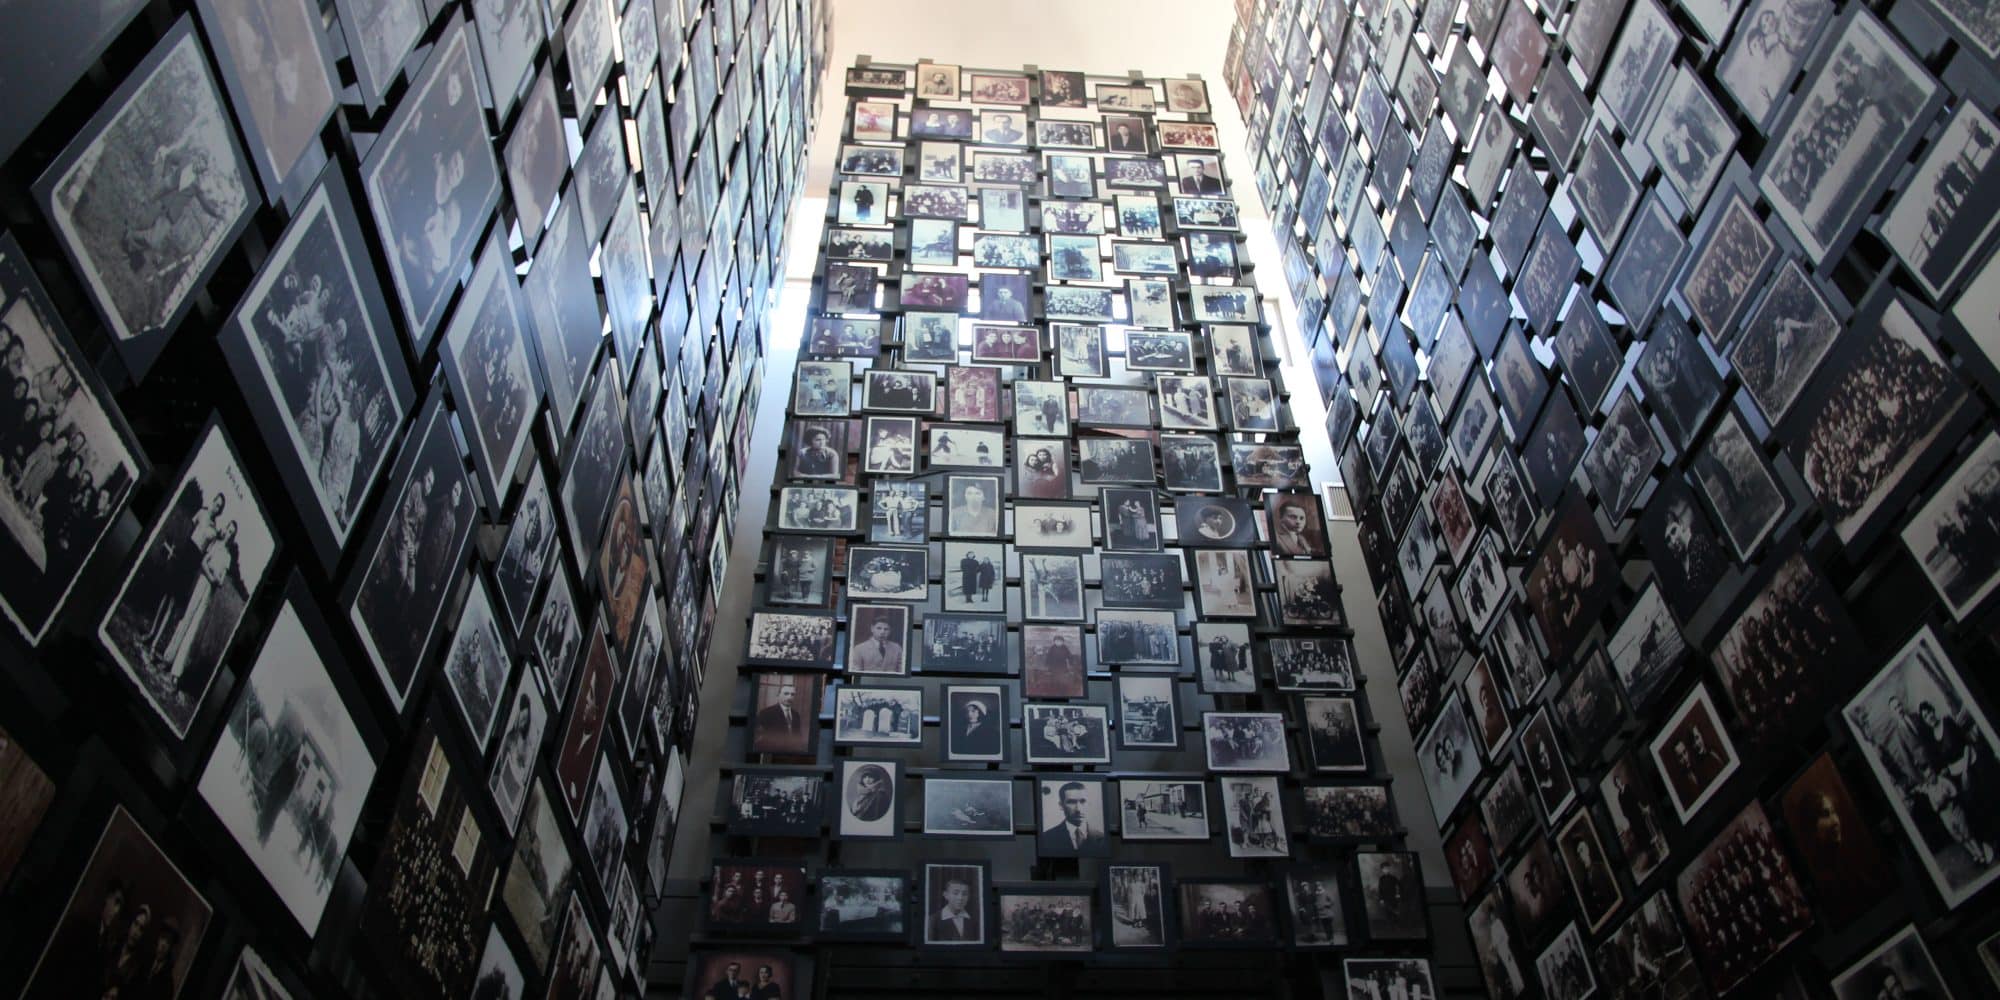 A view looking up at a towering atrium wall filled with numerous framed photos in black and white, under a clear skylight.